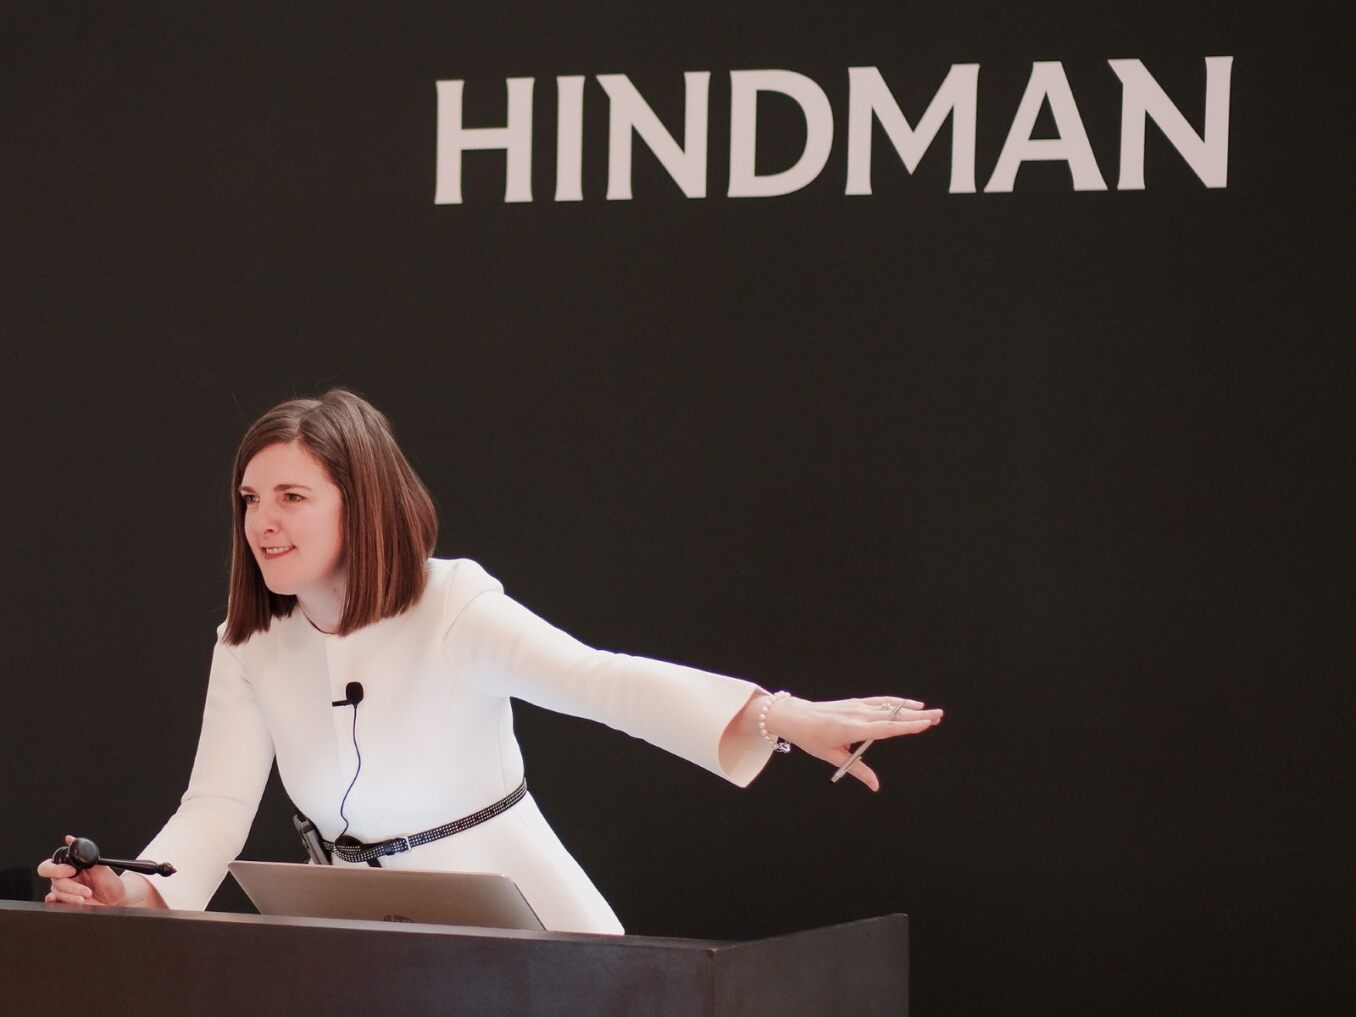 Gemma Sudlow on the rostrum for Hindman’s inaugural New York auction, Time & Space: Watches from the Collection of Glen de Vries. Image courtesy of Hindman.